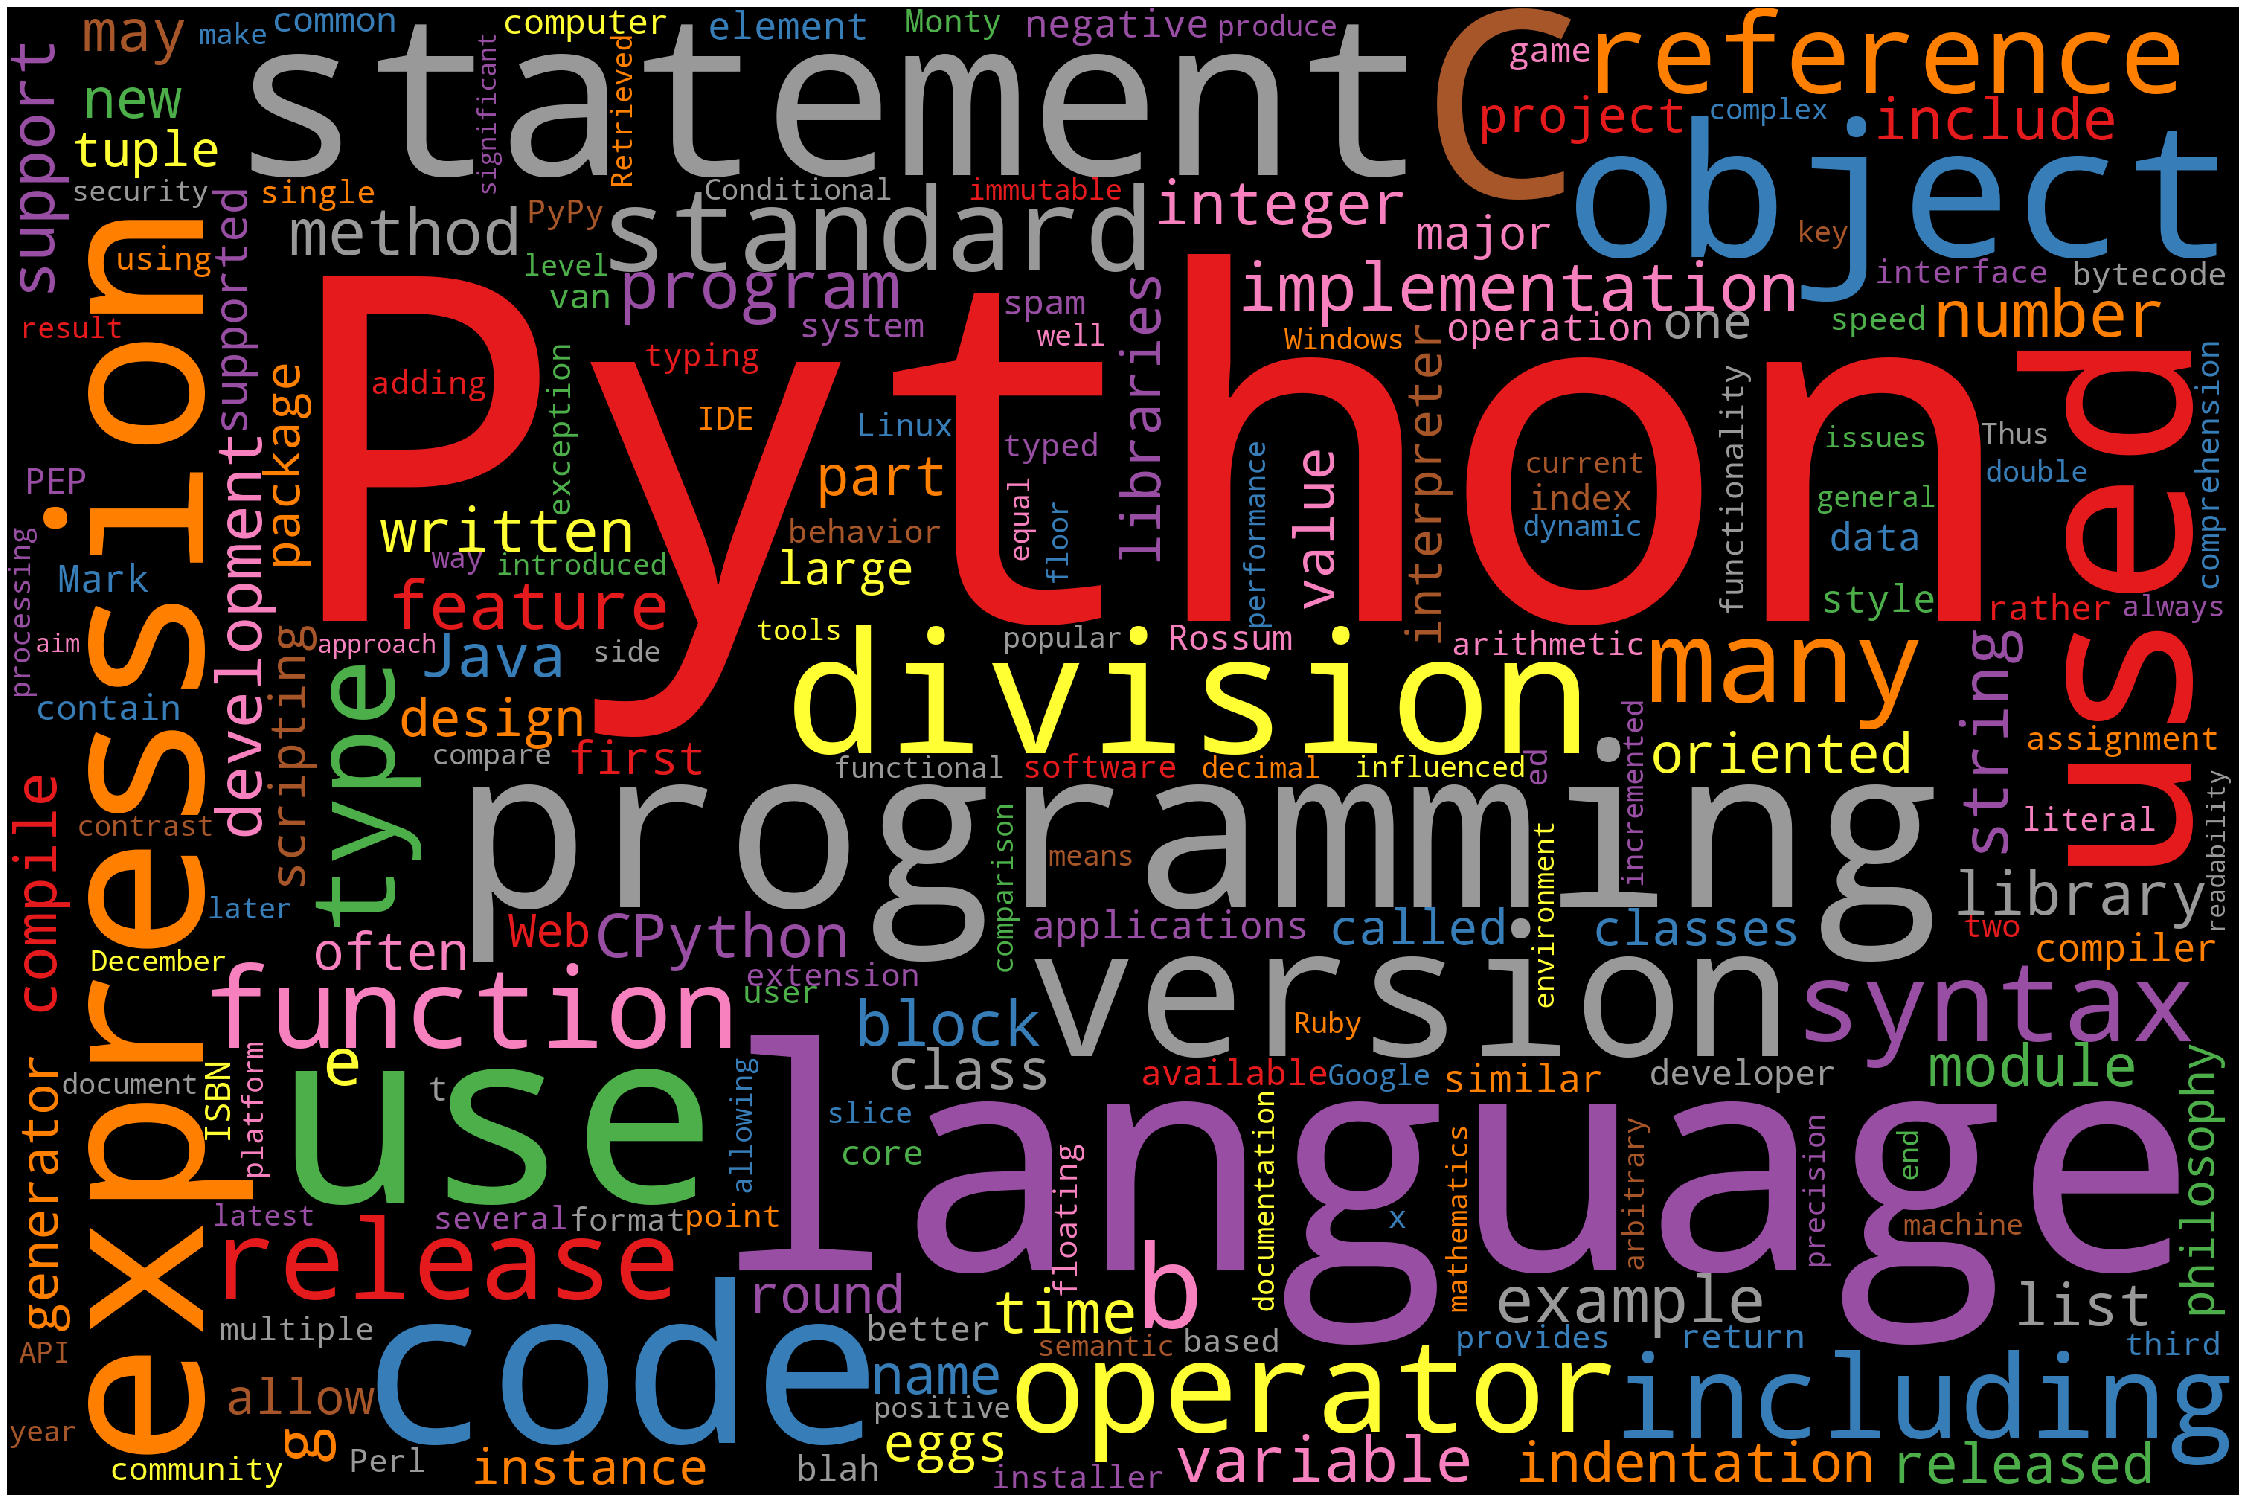 Create a Word Cloud in Python